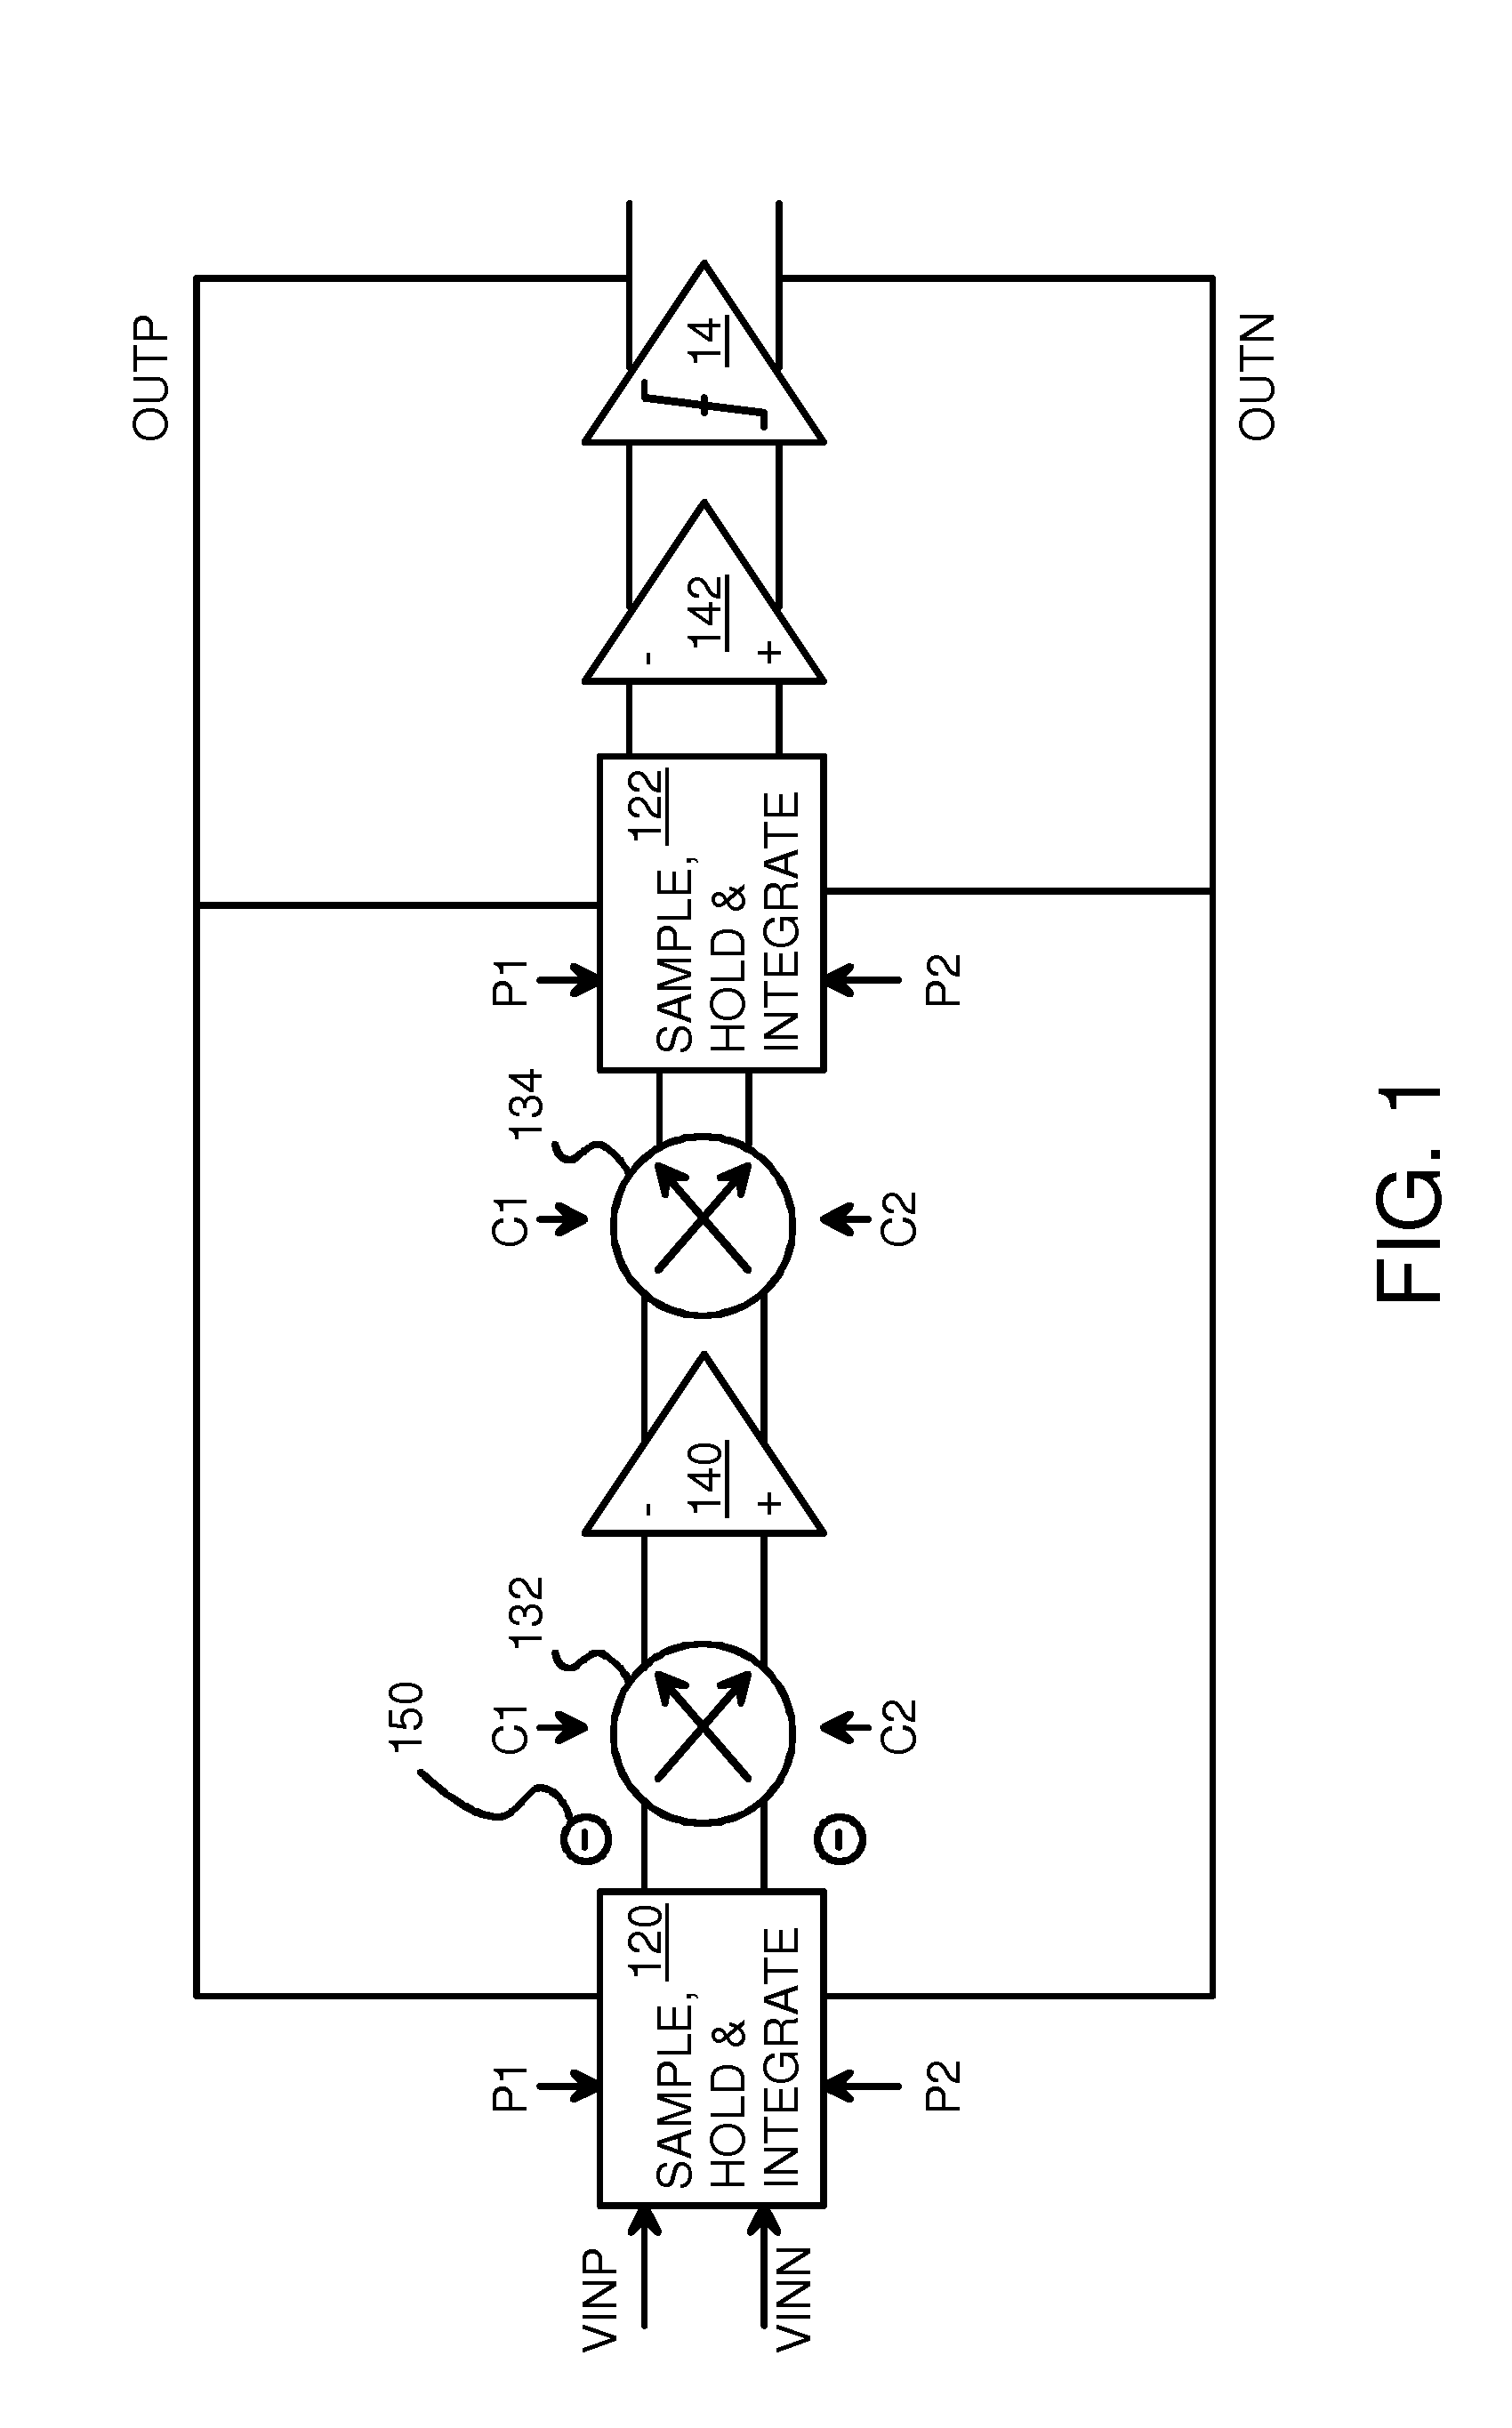 Reduced residual offset sigma delta analog-to-digital converter (ADC) with chopper timing at end of integrating phase before trailing edge